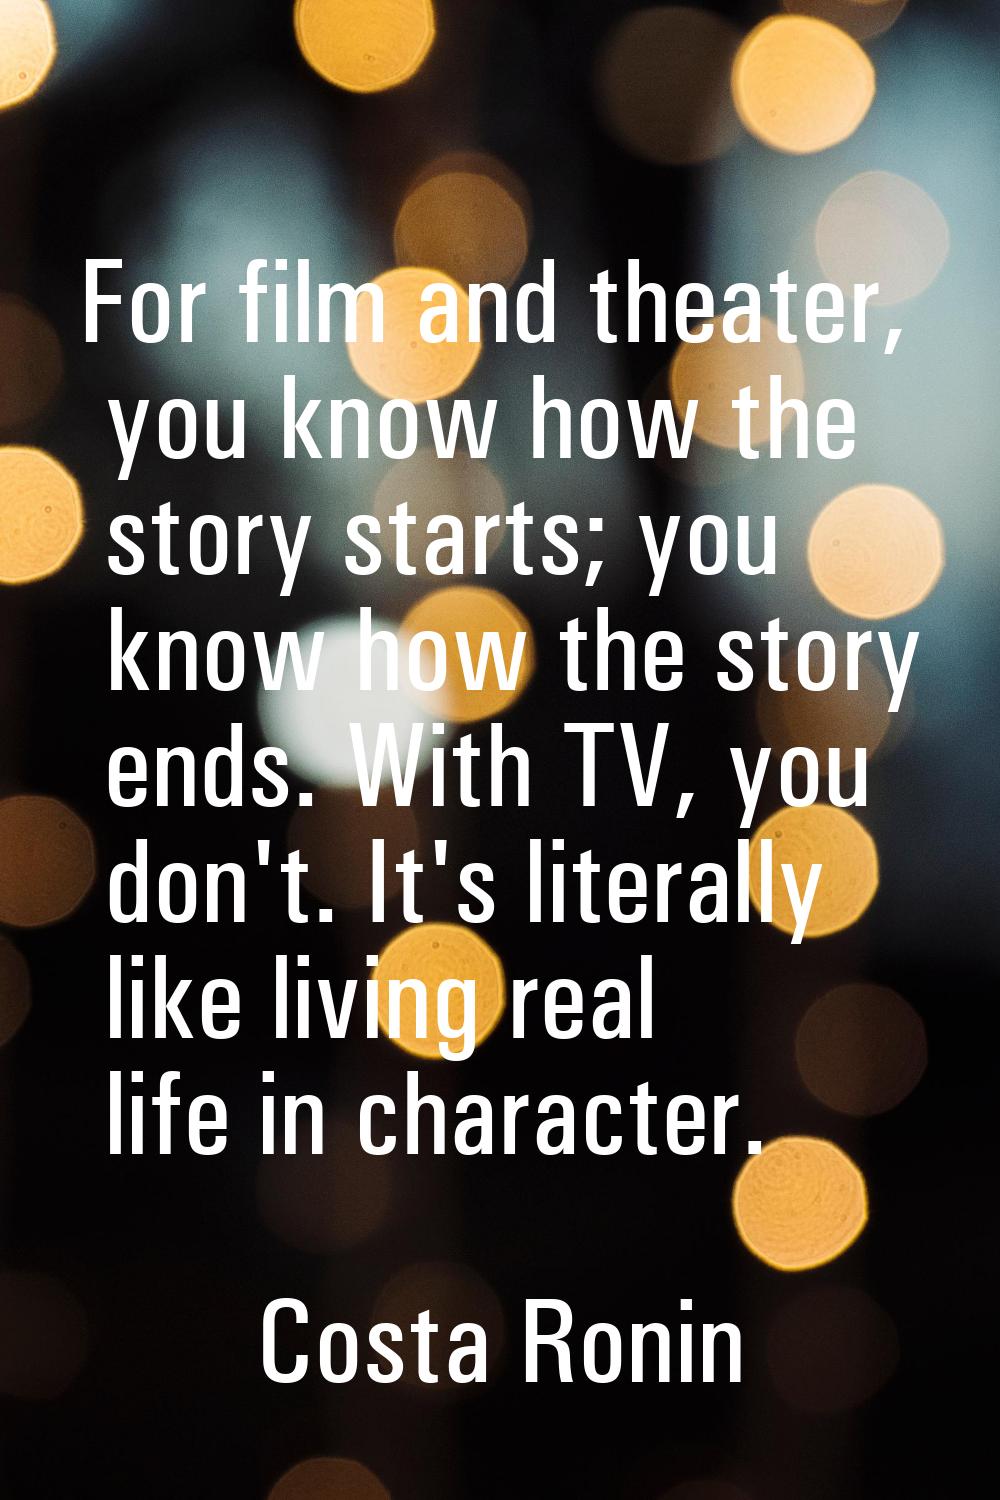 For film and theater, you know how the story starts; you know how the story ends. With TV, you don'